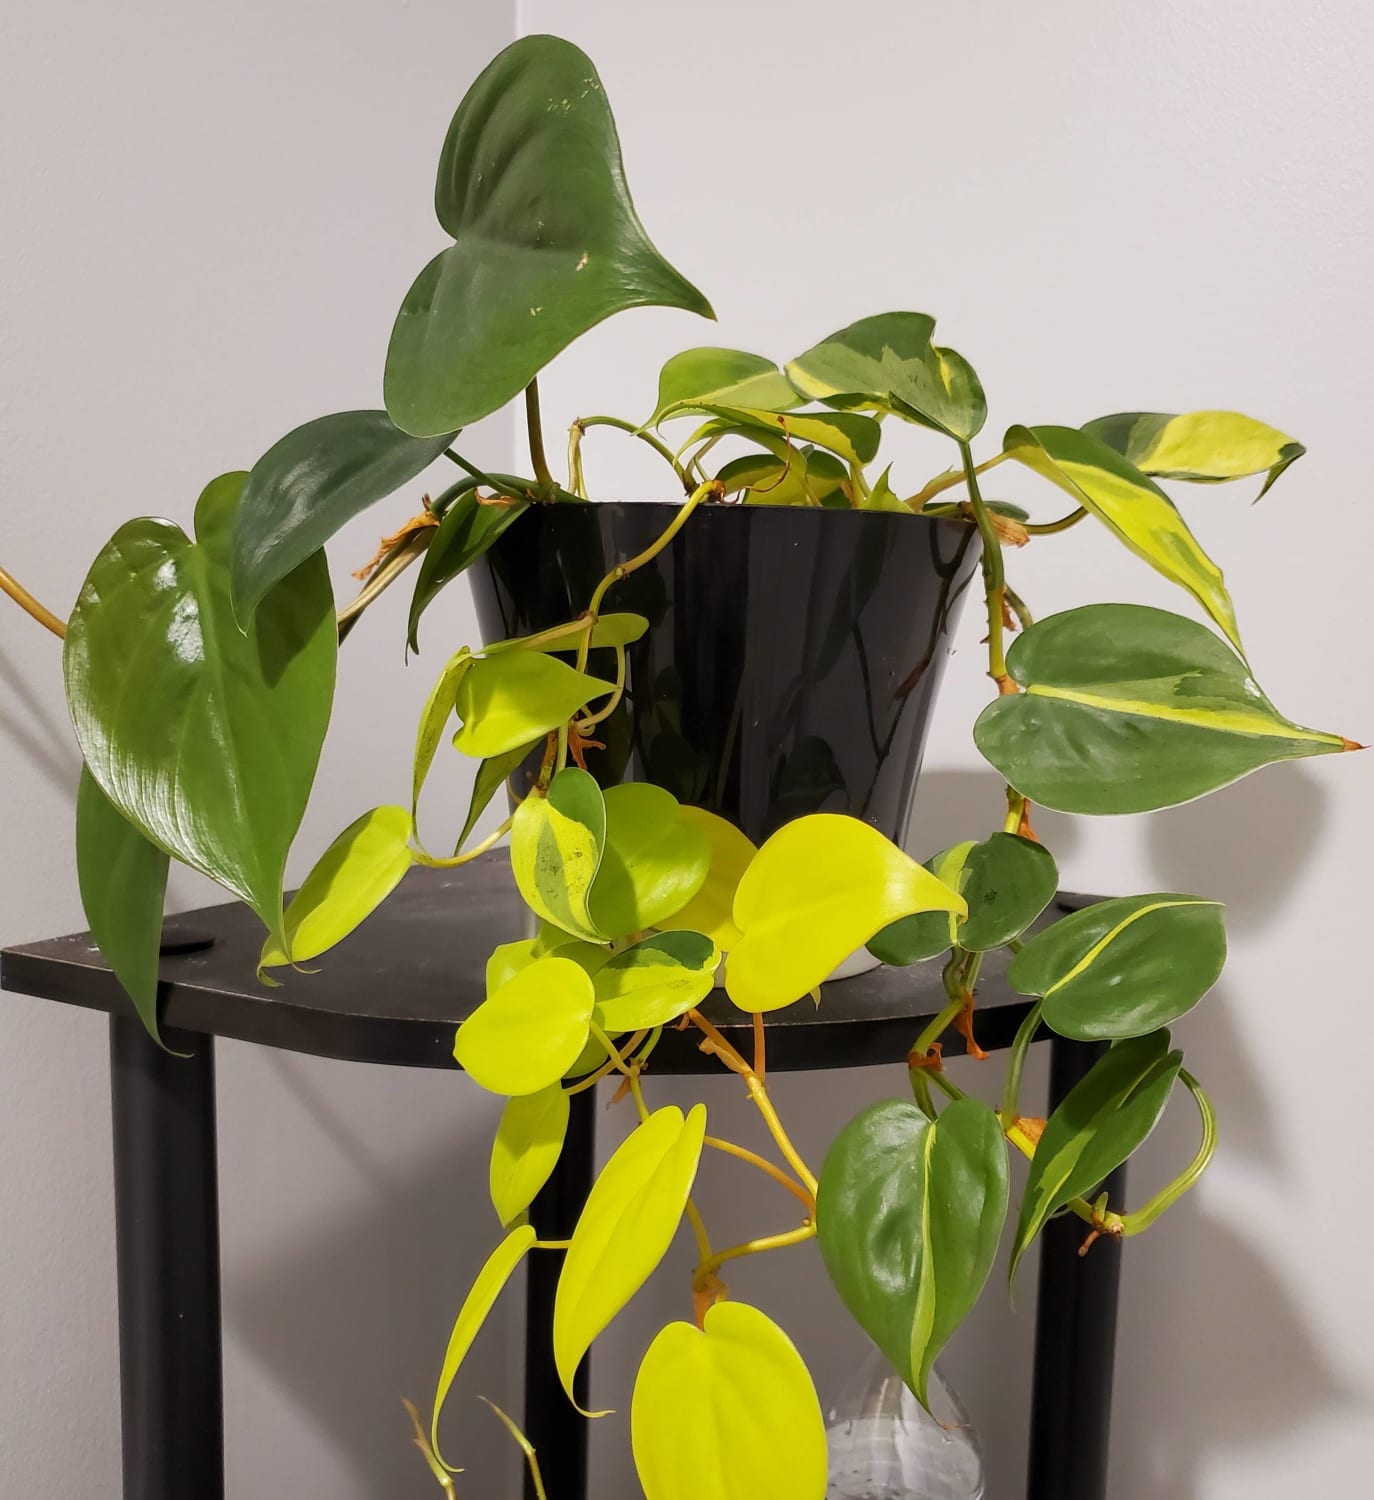 Brazilian pothos cutting that was gifted from a friend a few years ago. It started out as just one or two Brazilian leaves and grew into three different kinds. Is this sort of thing common?